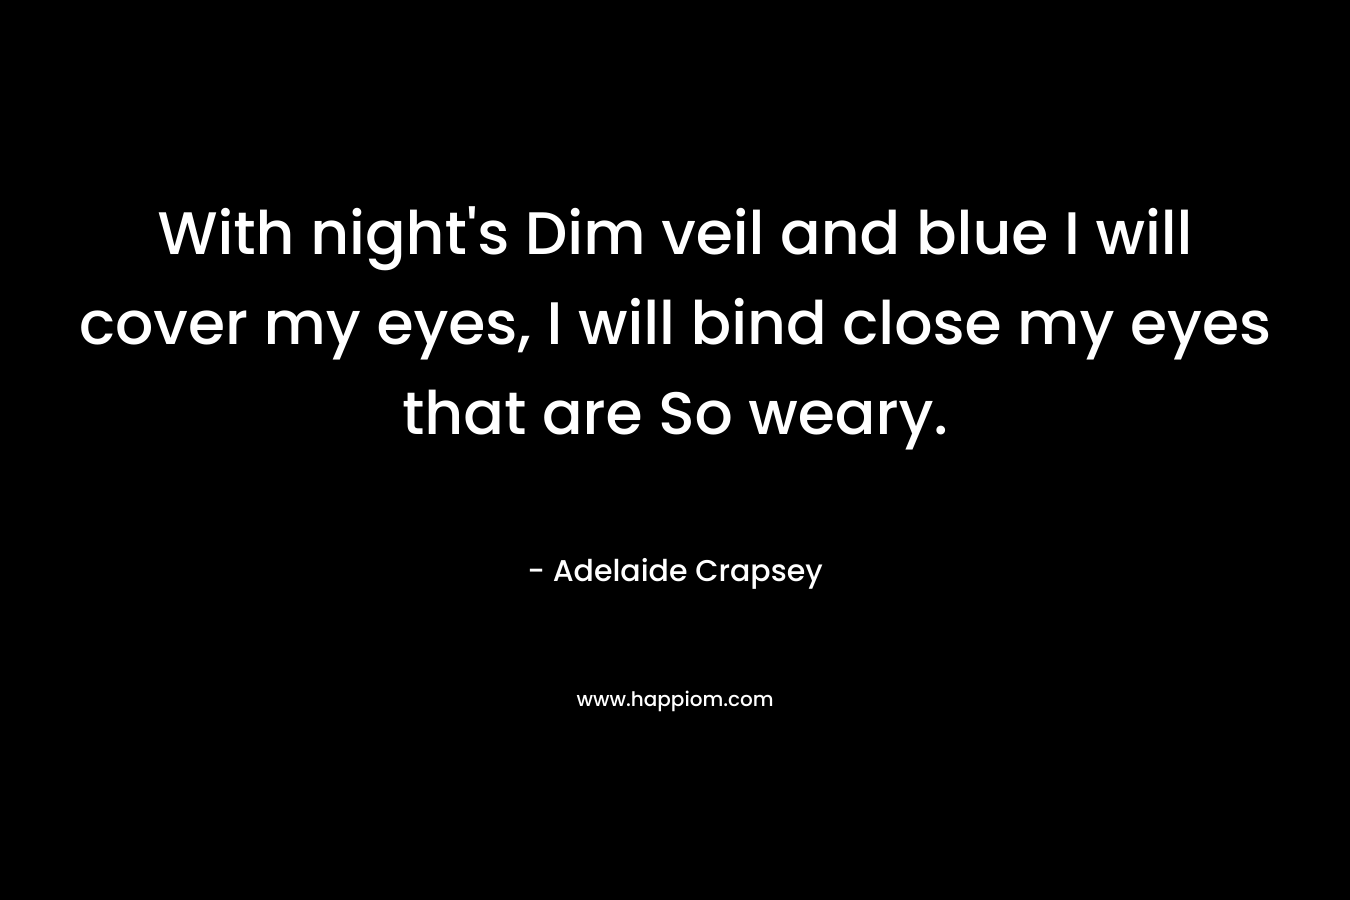 With night’s Dim veil and blue I will cover my eyes, I will bind close my eyes that are So weary. – Adelaide Crapsey